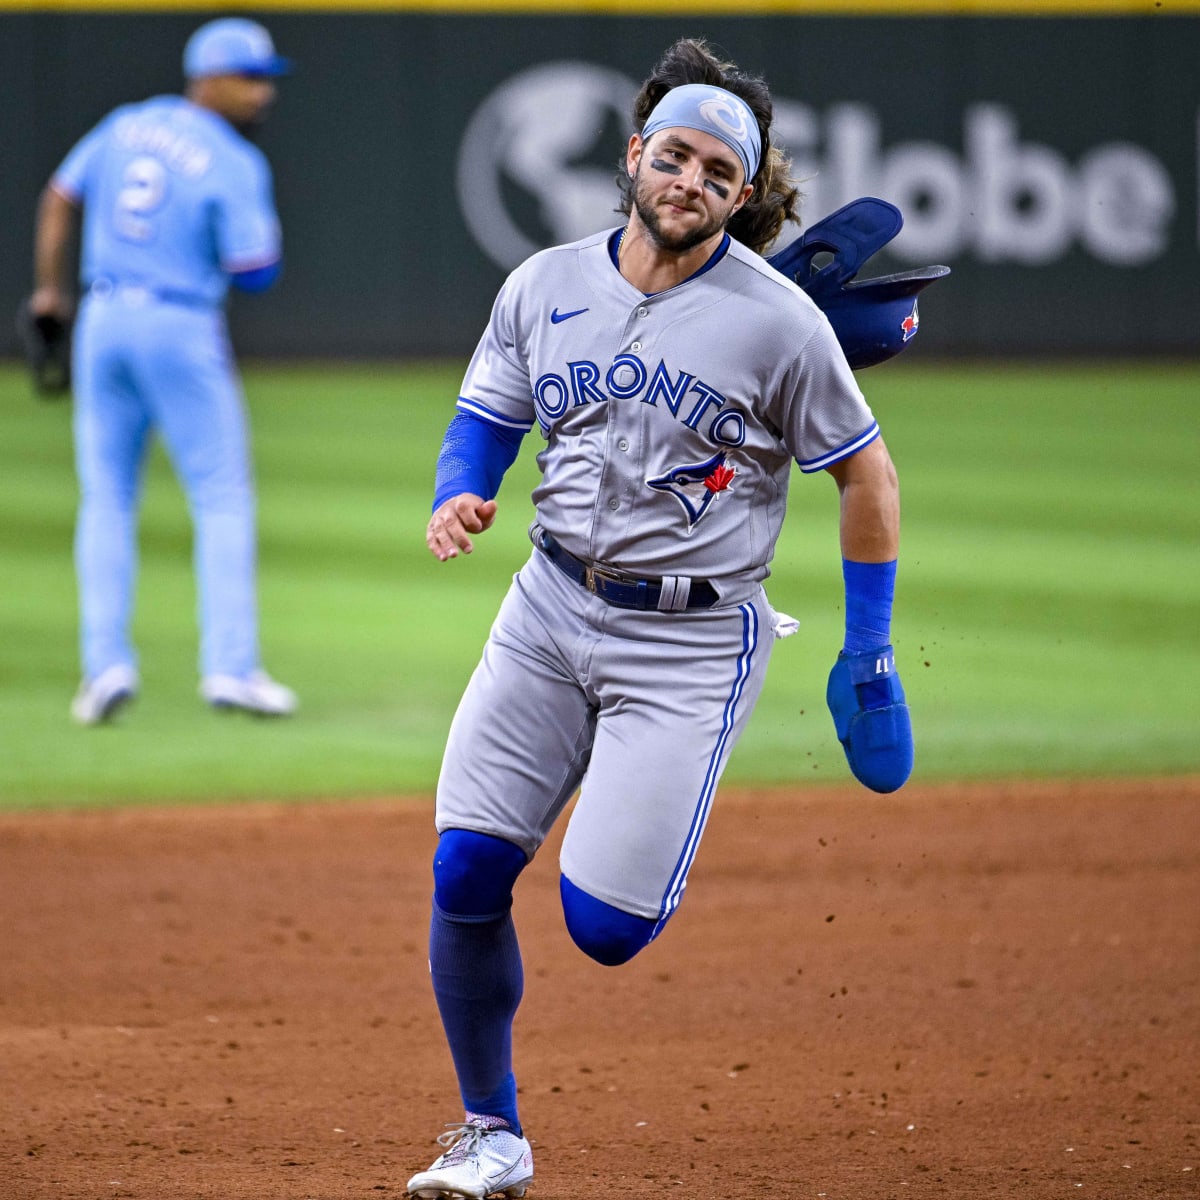 Bo Bichette of the Toronto Blue Jays before the game wearing a